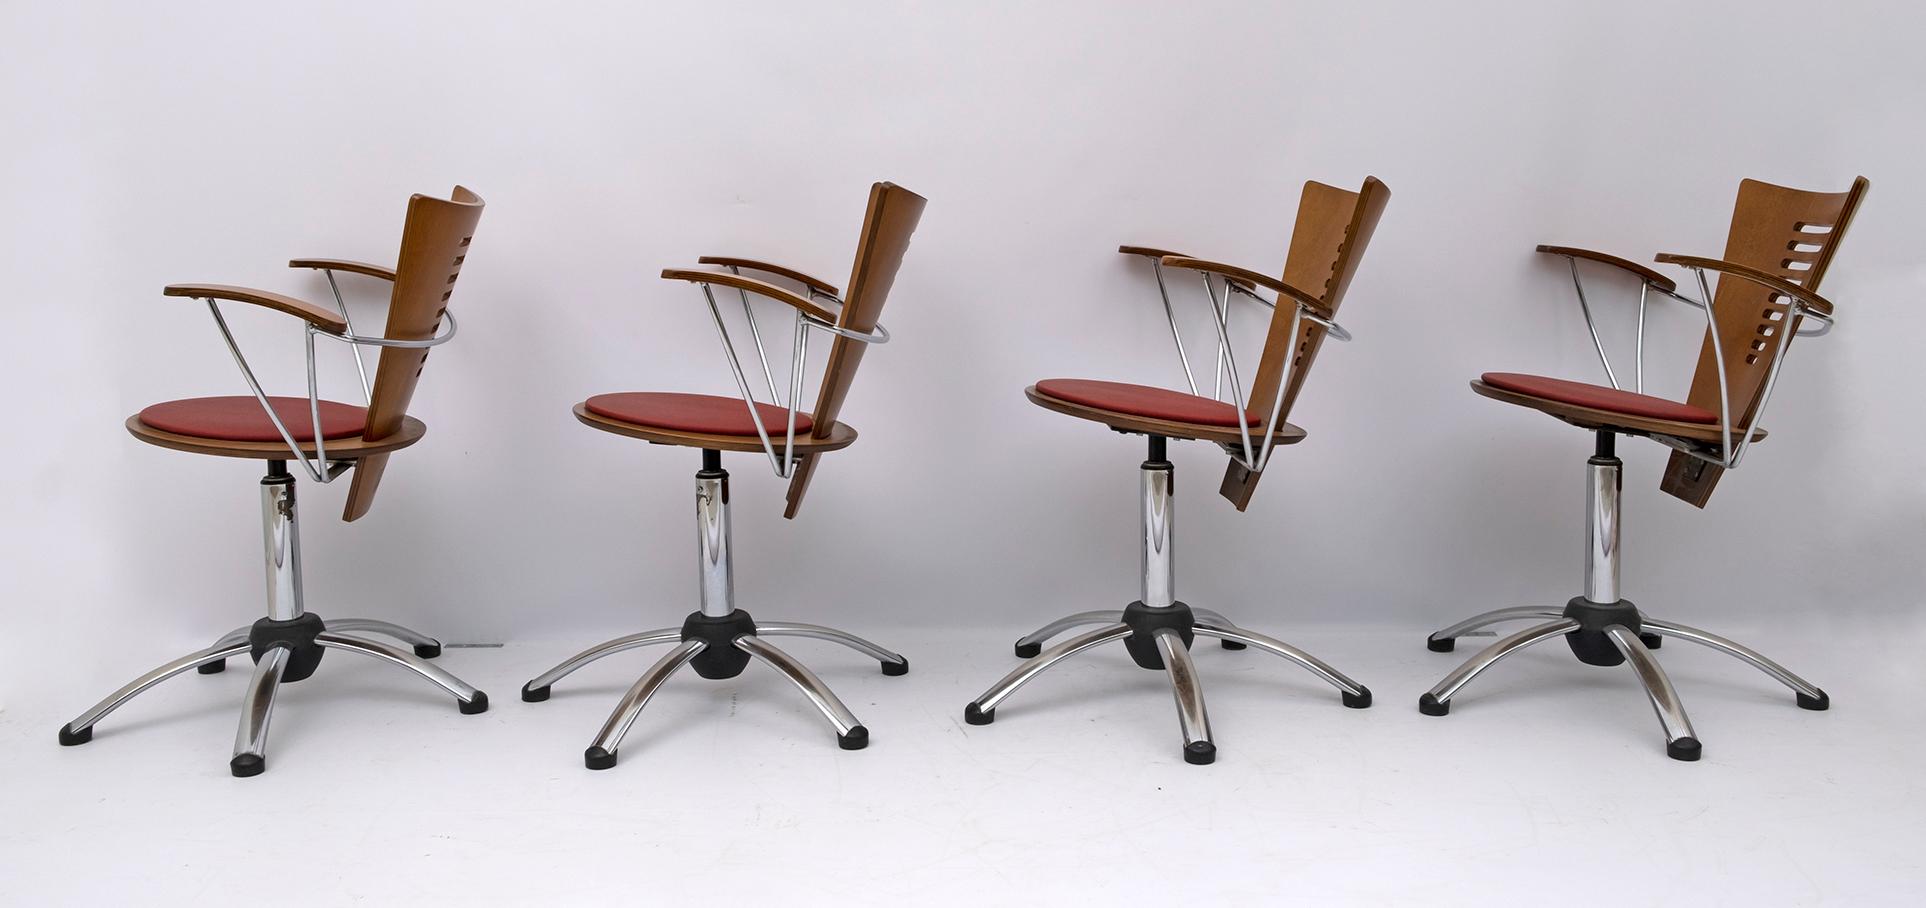 Four Postmodern Italian Swivel Chairs Curved Wood and Chromed Metal, 1980s For Sale 2